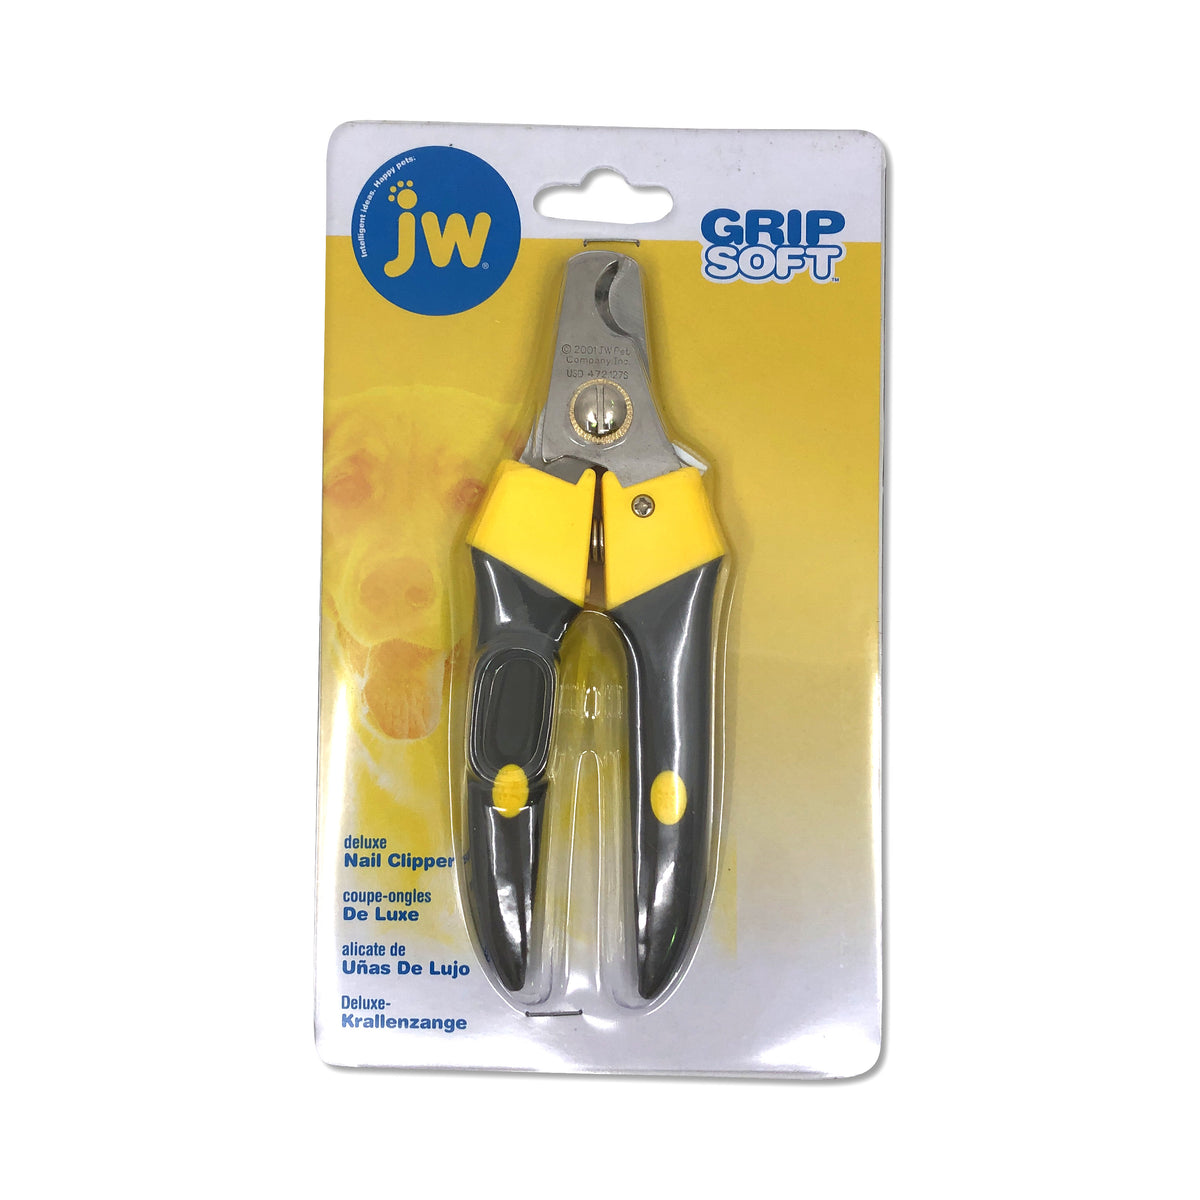 Gripsoft Deluxe Nail Clipper